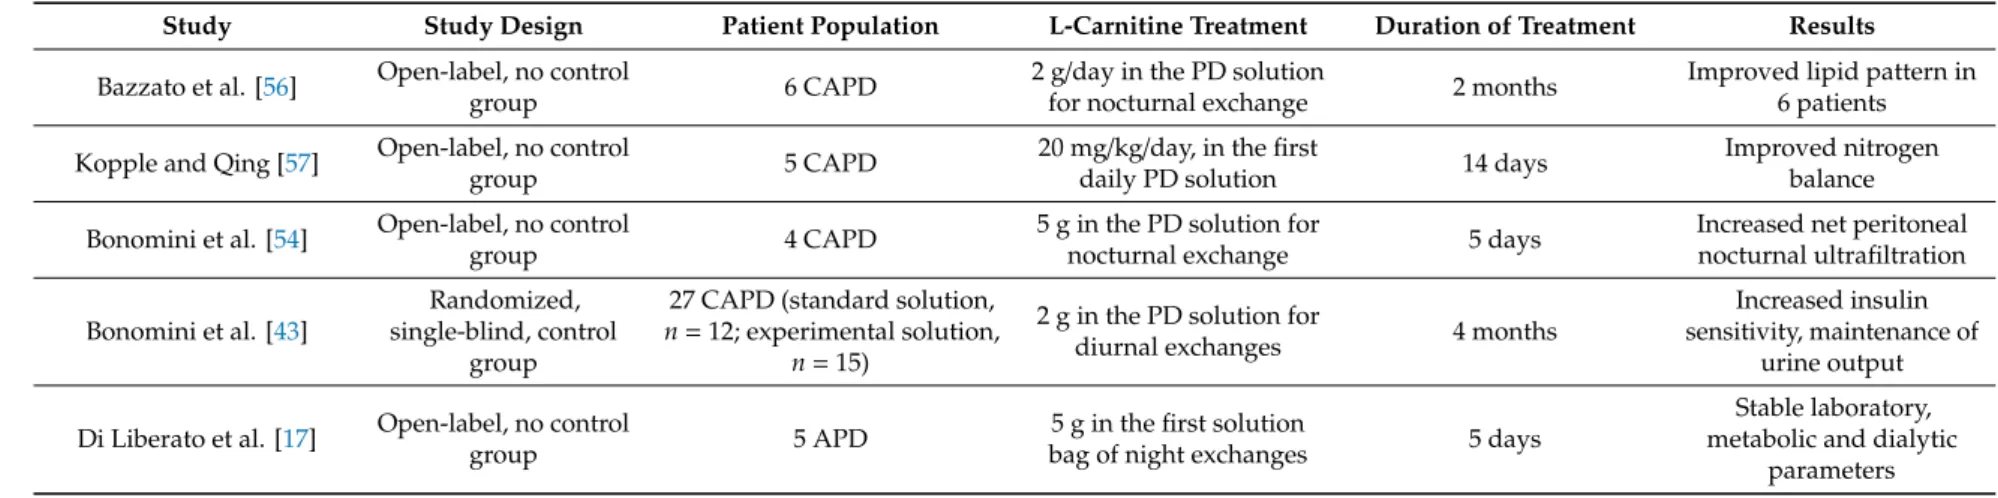 Table 2. Summary of studies on L-carnitine-containing solution in end-stage renal disease patients on peritoneal dialysis.